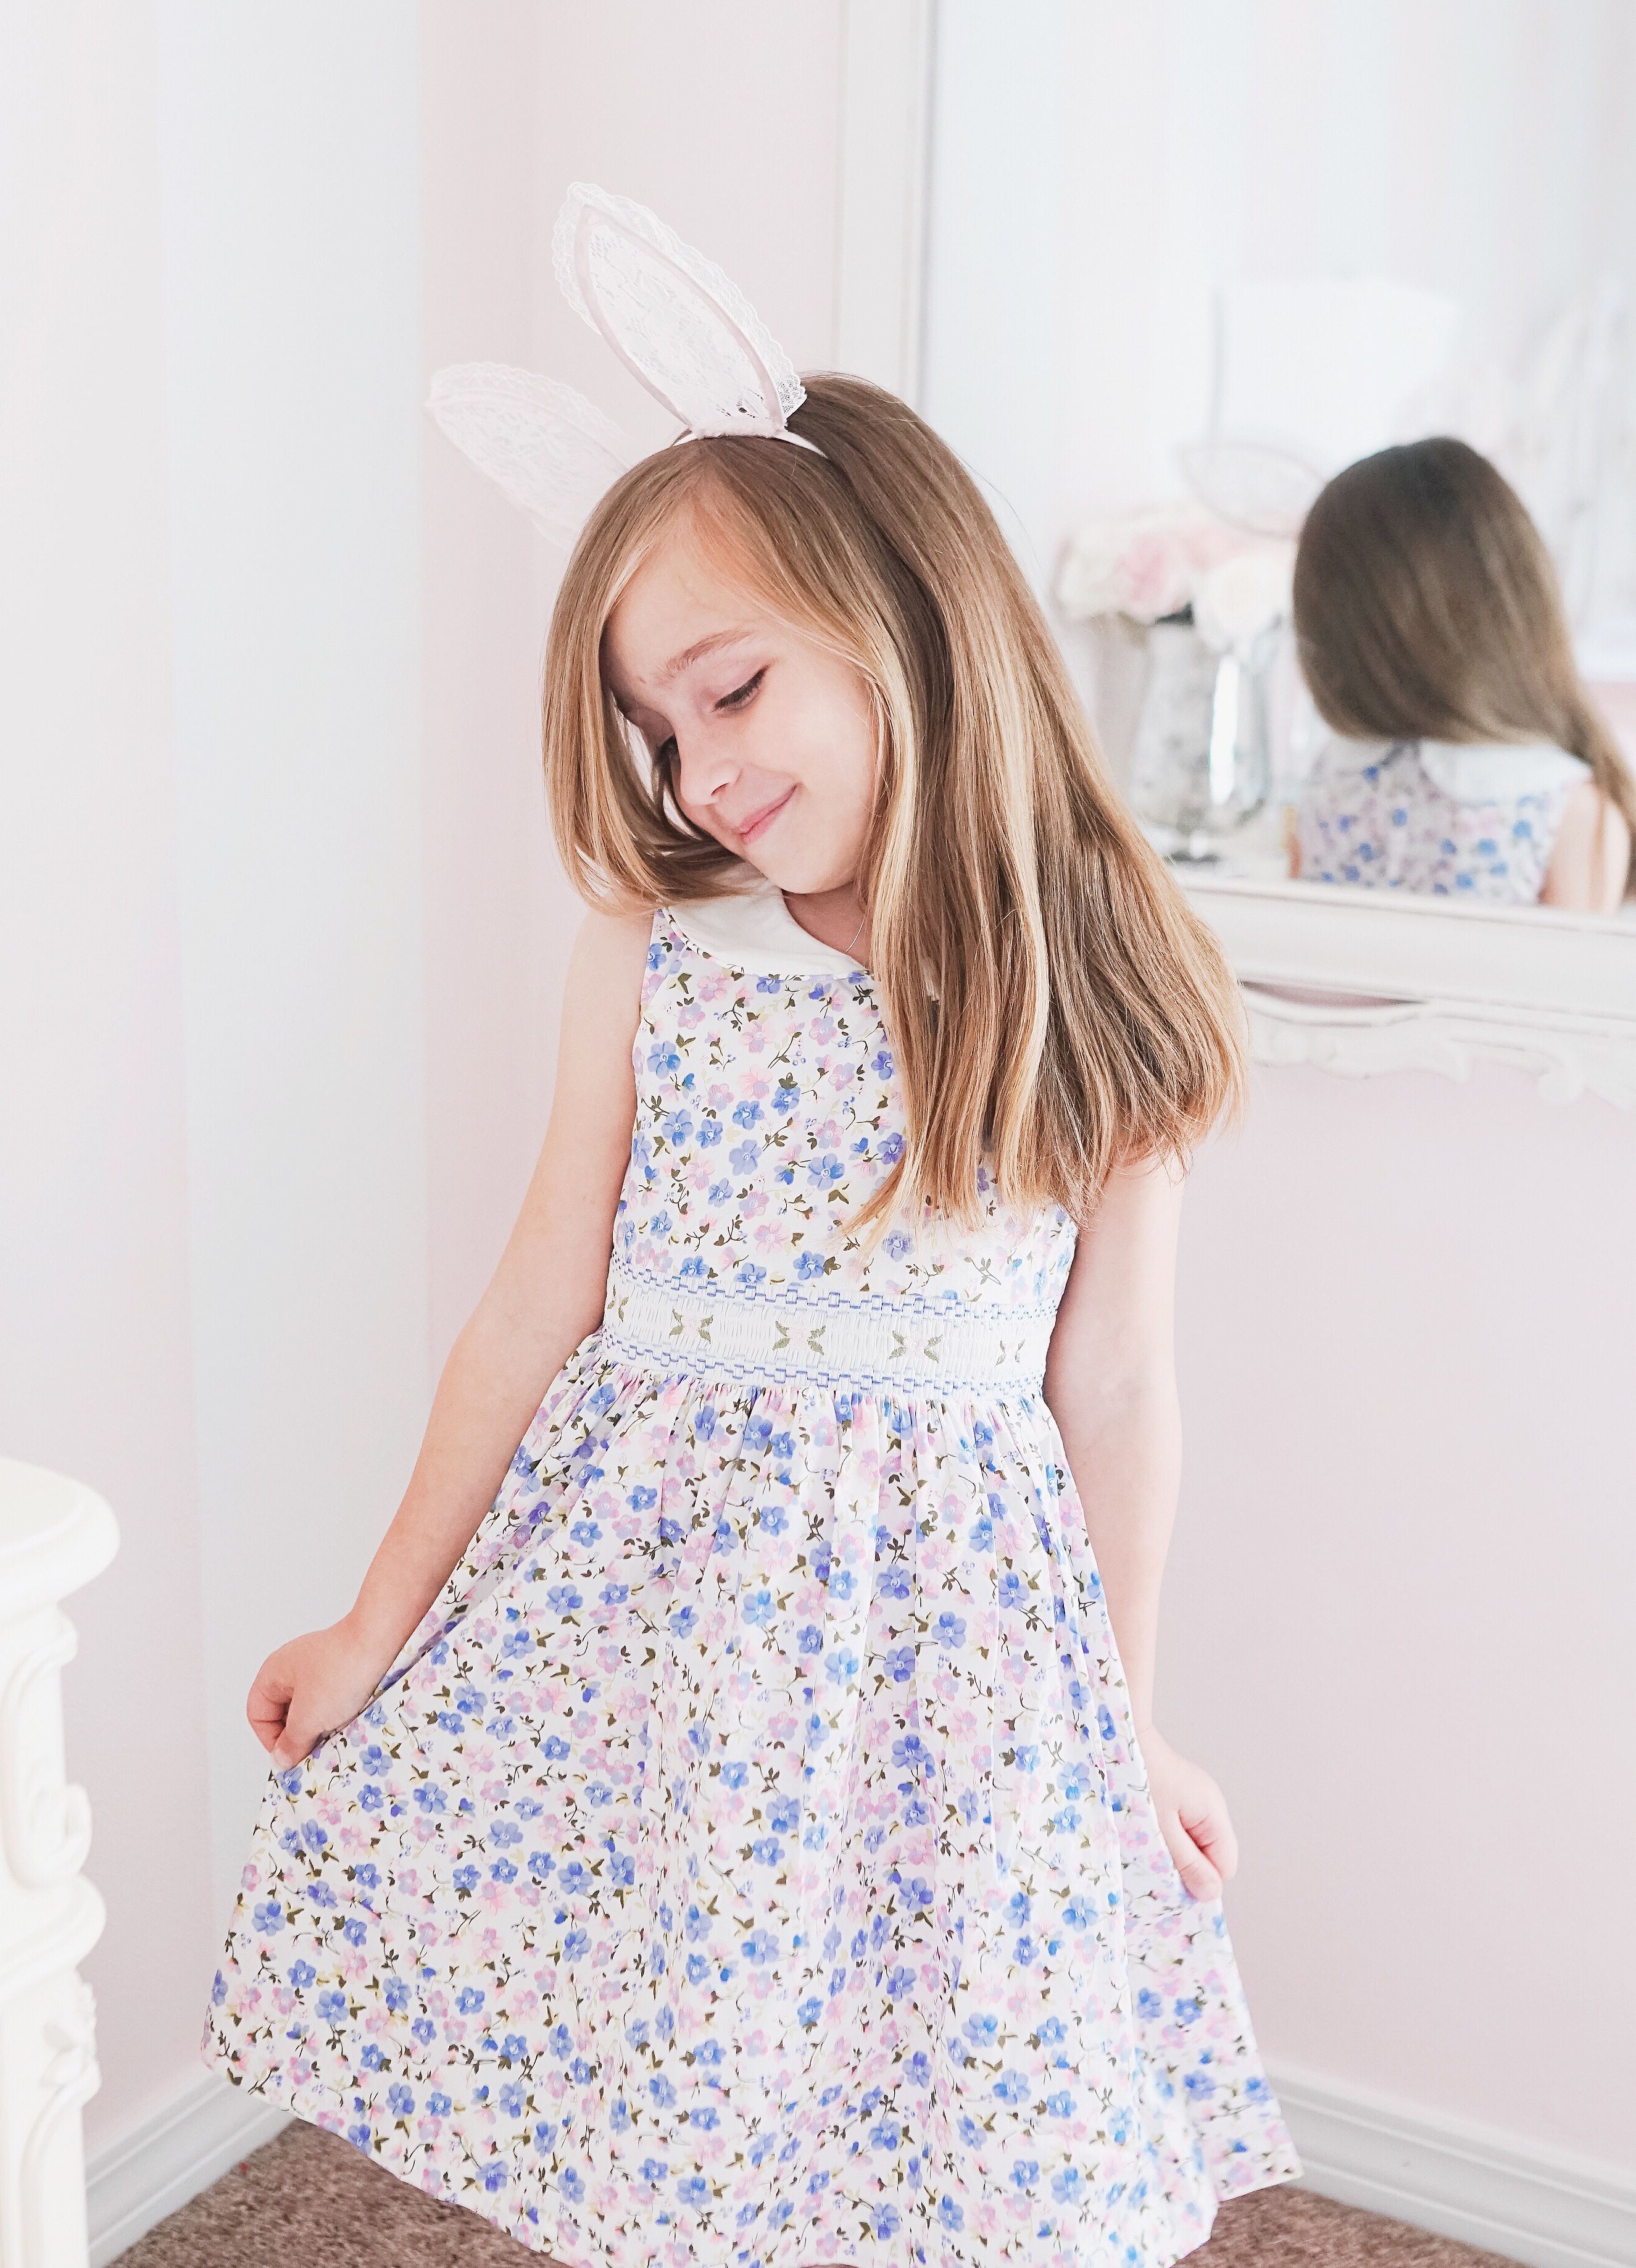 Chloe's Hunt For The Perfect Easter Dress